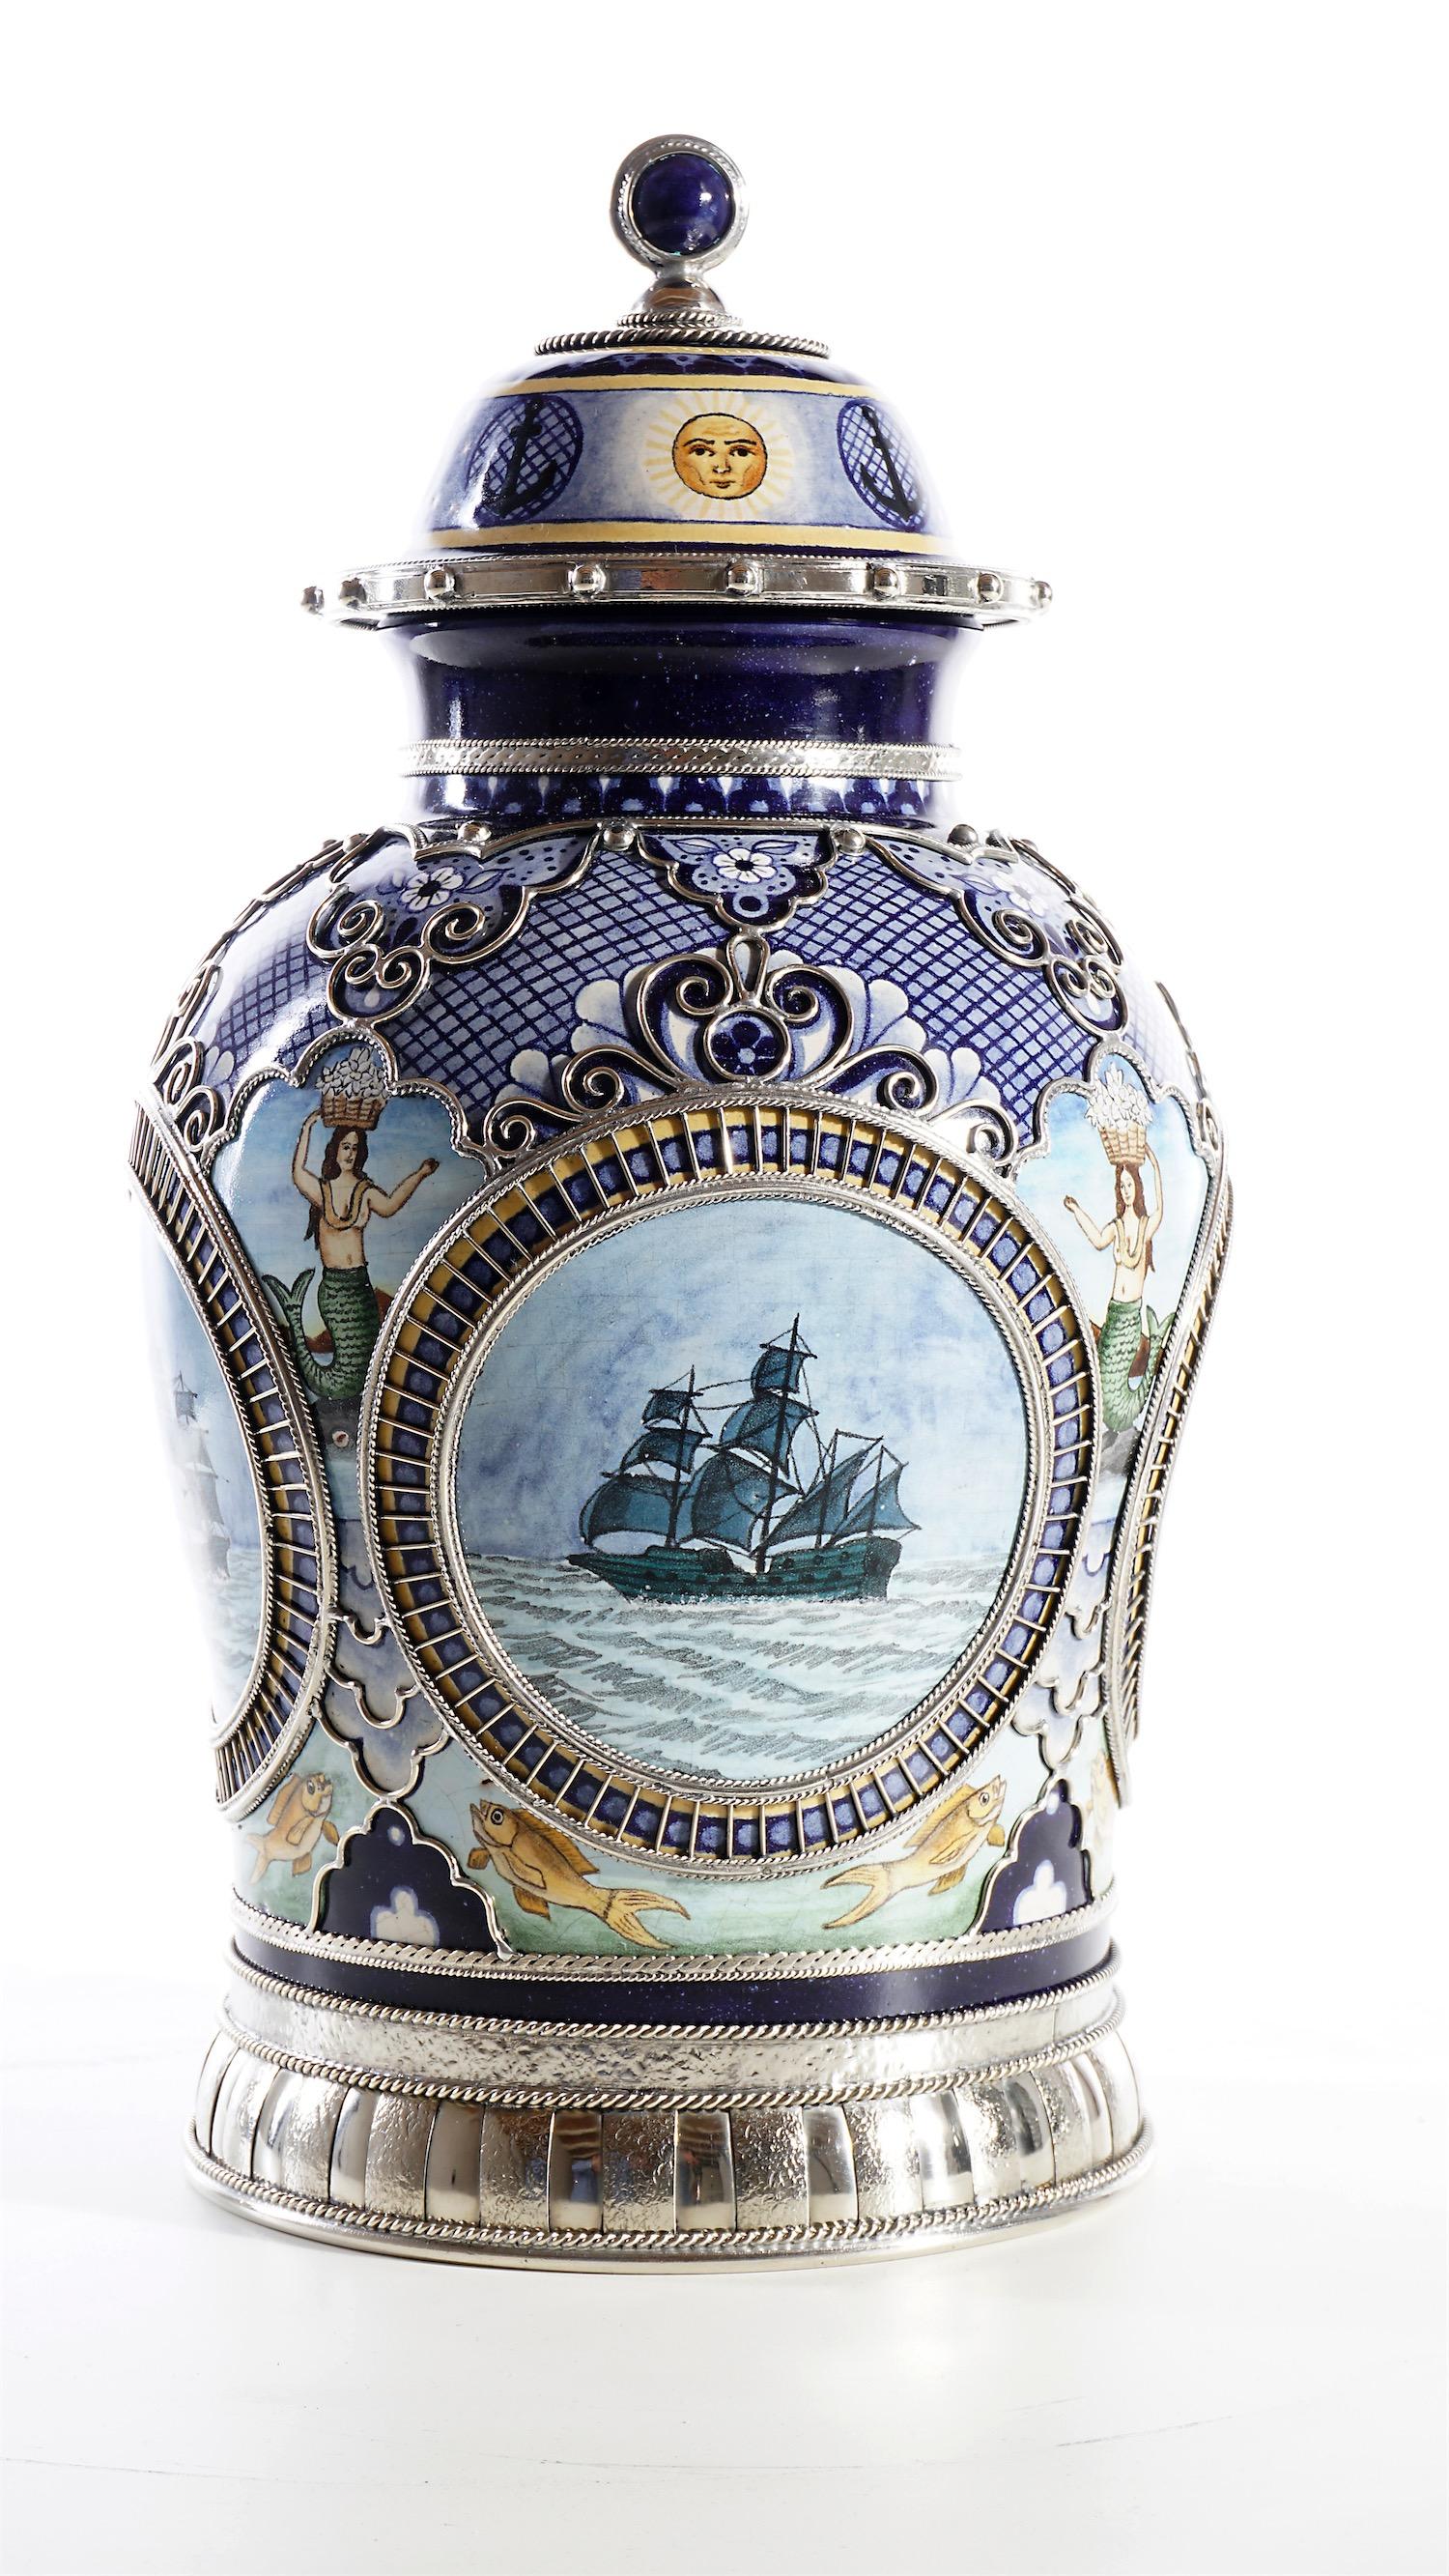 Mexican Ceramic and White Metal 'Alpaca' Jar with Hand Painted Galeons, Mermaids